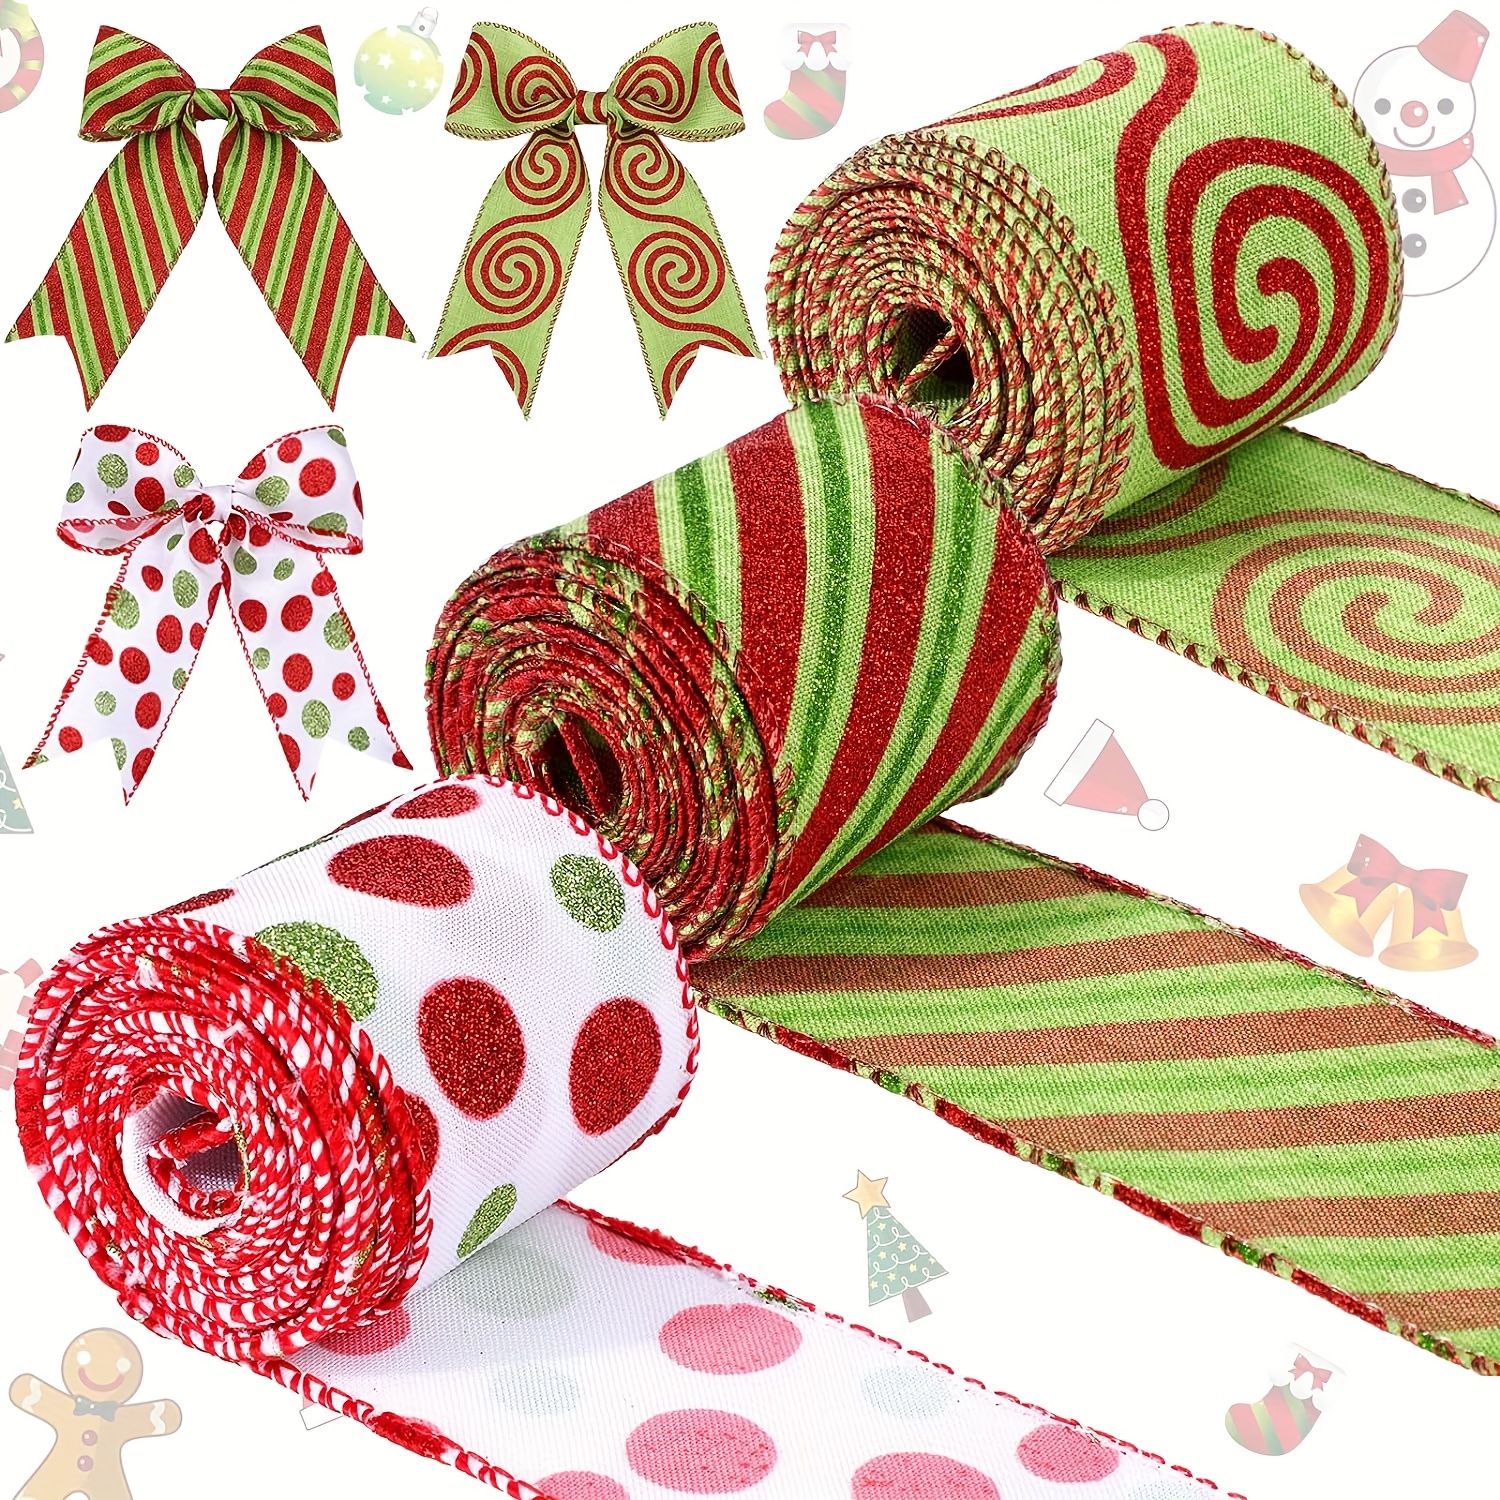 

3 Rolls Of Festive Christmas Ribbon: Red And Lime Green Swirls, Polka Dots, And Classic Style For Diy Crafts And Tree Decorations